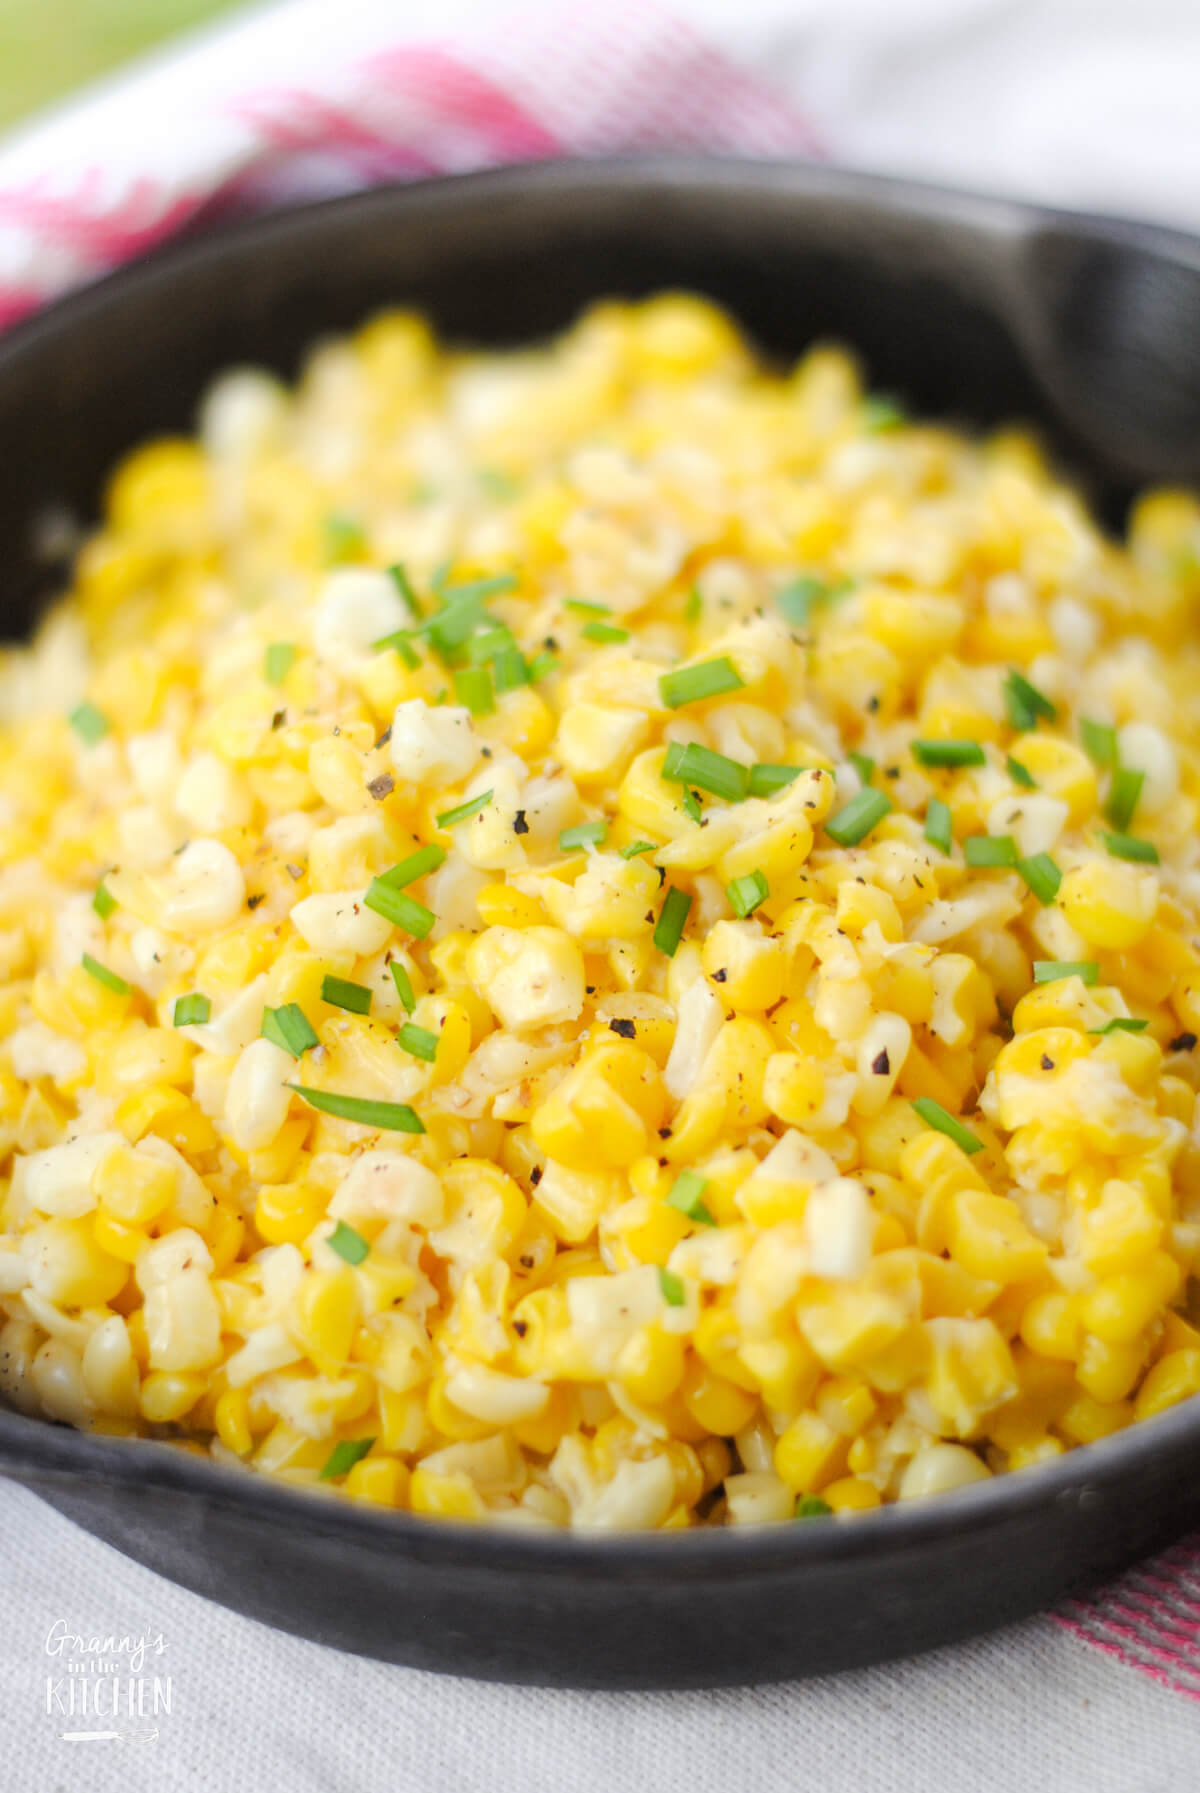 close up of a cast iron skillet filled with cooked corn, to show detail